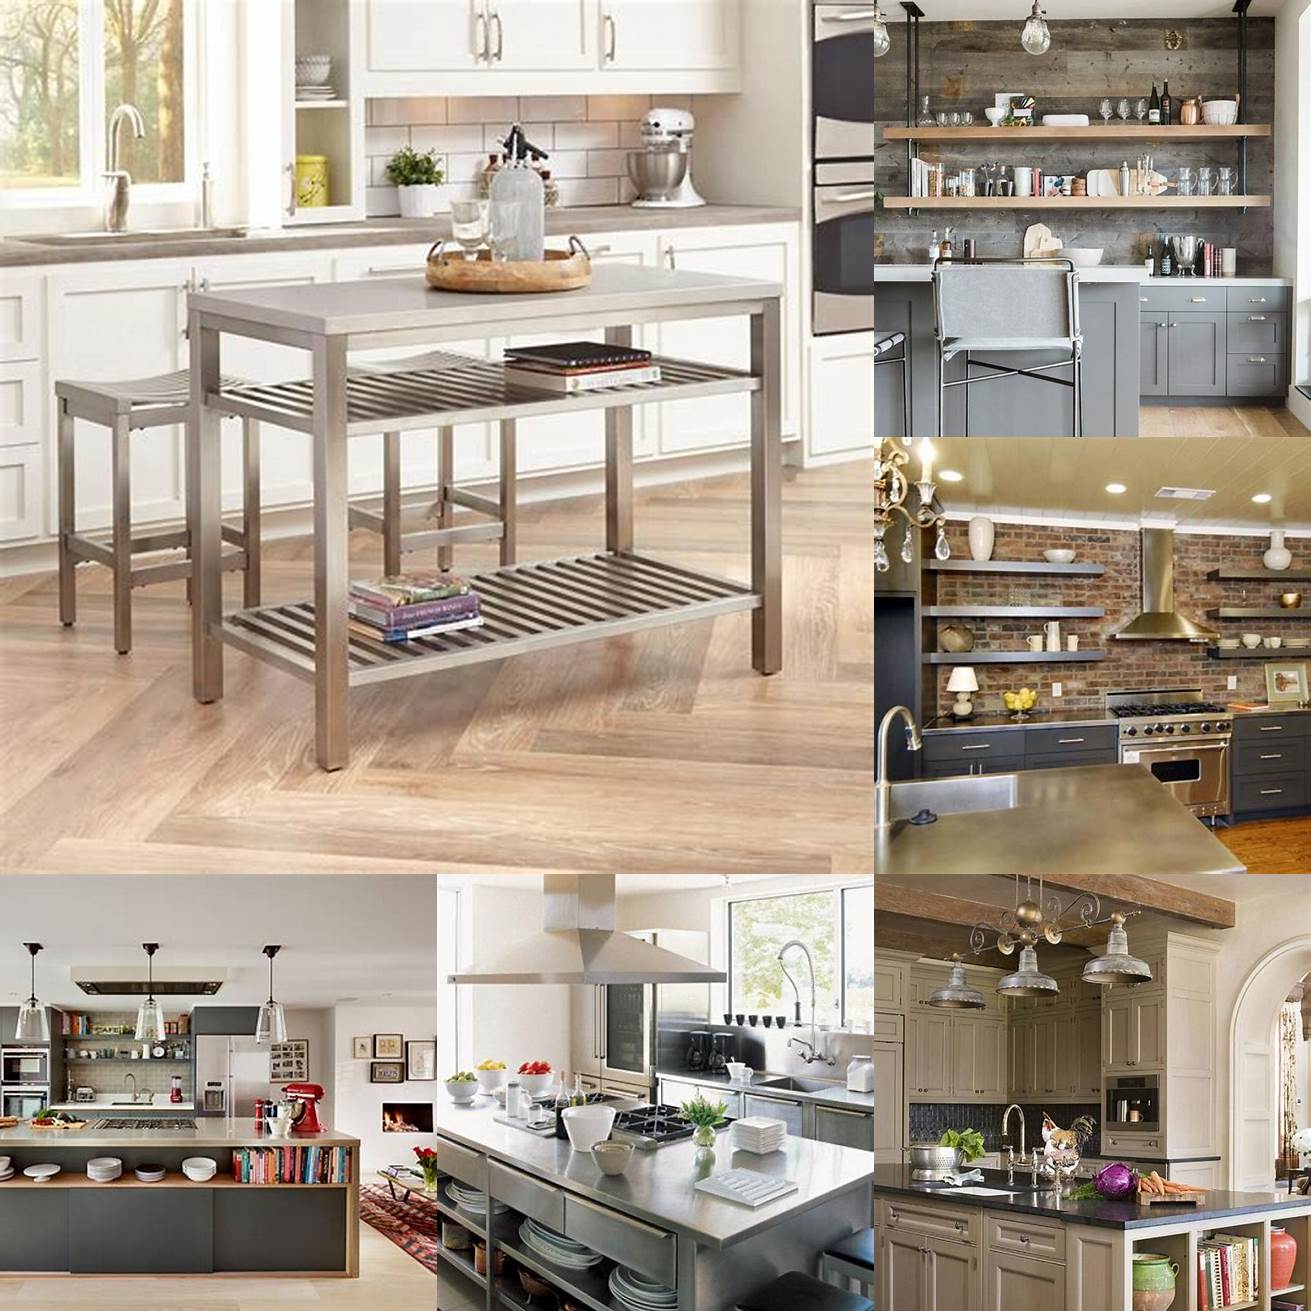 A stainless steel kitchen island with an open shelving design